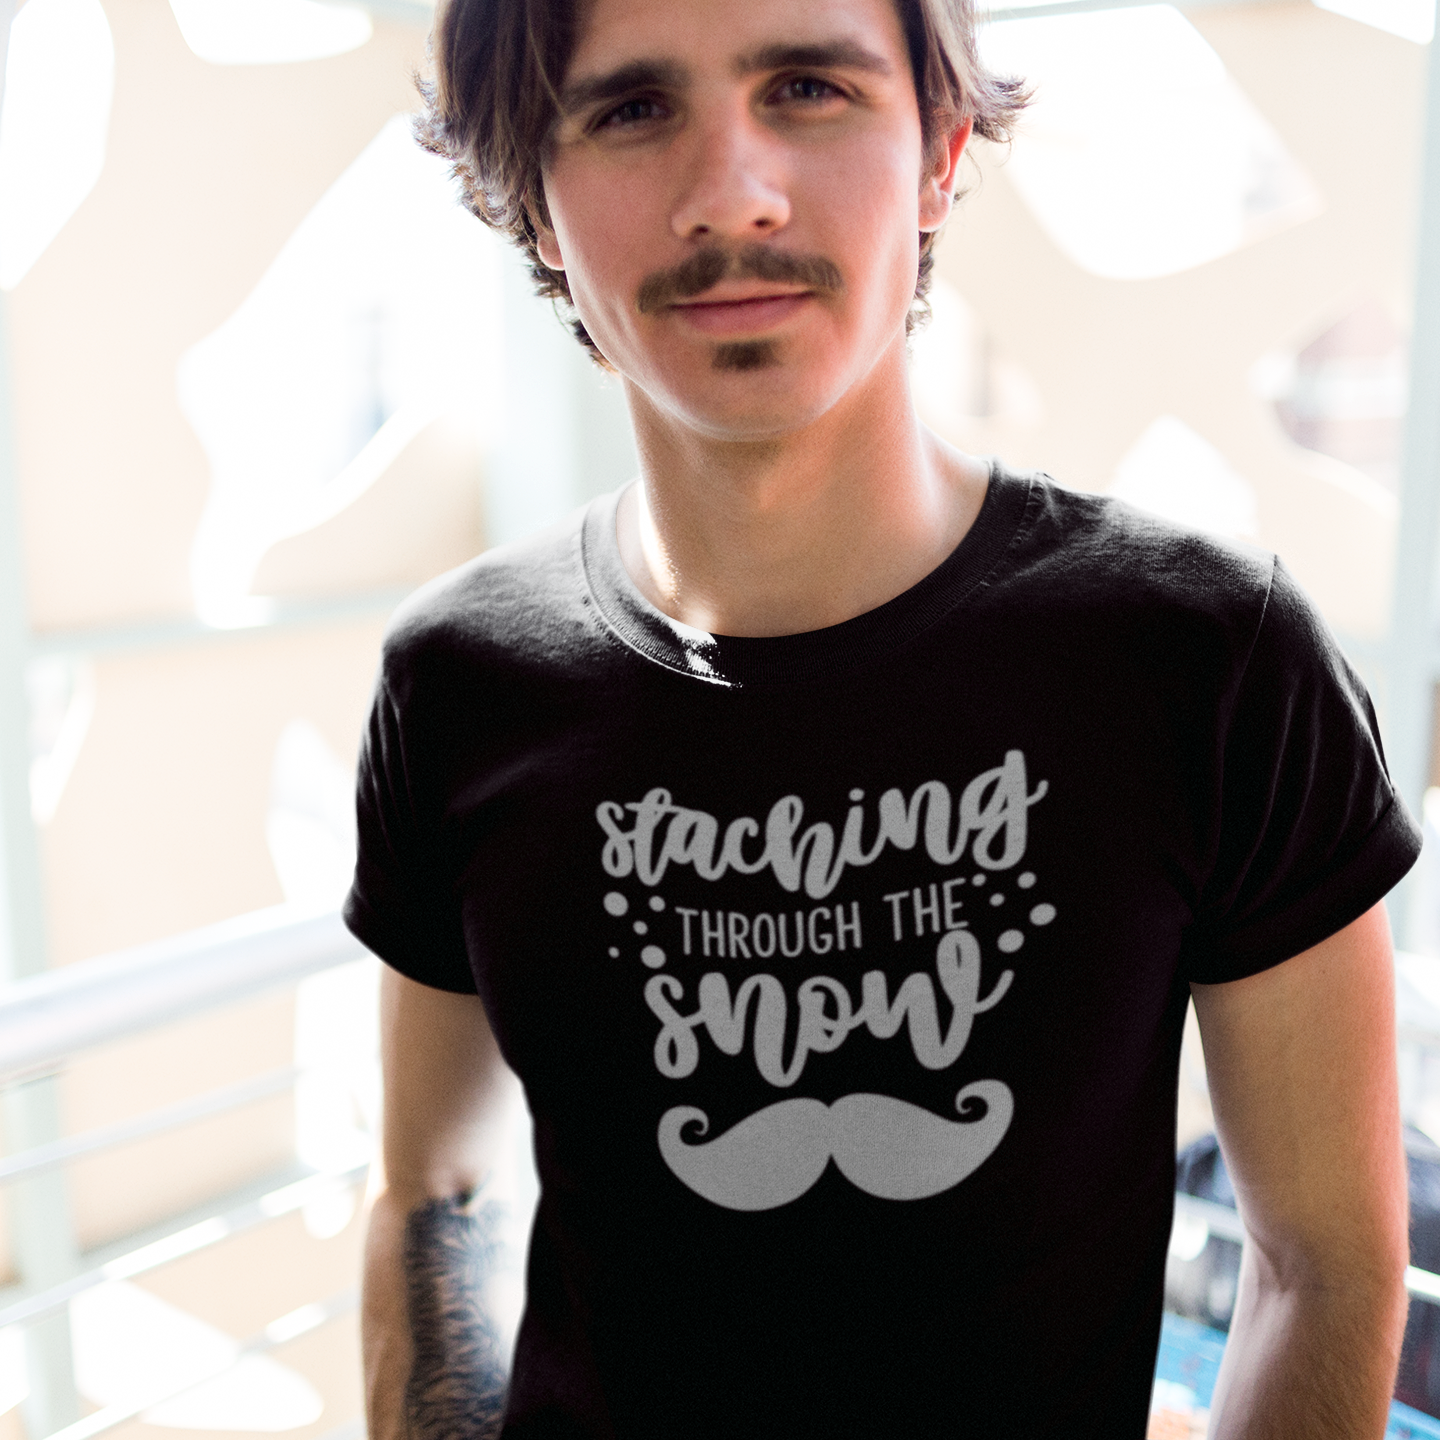 Man with mustache wearing black shirt with 'Staching through the snow' print by KMLeon.